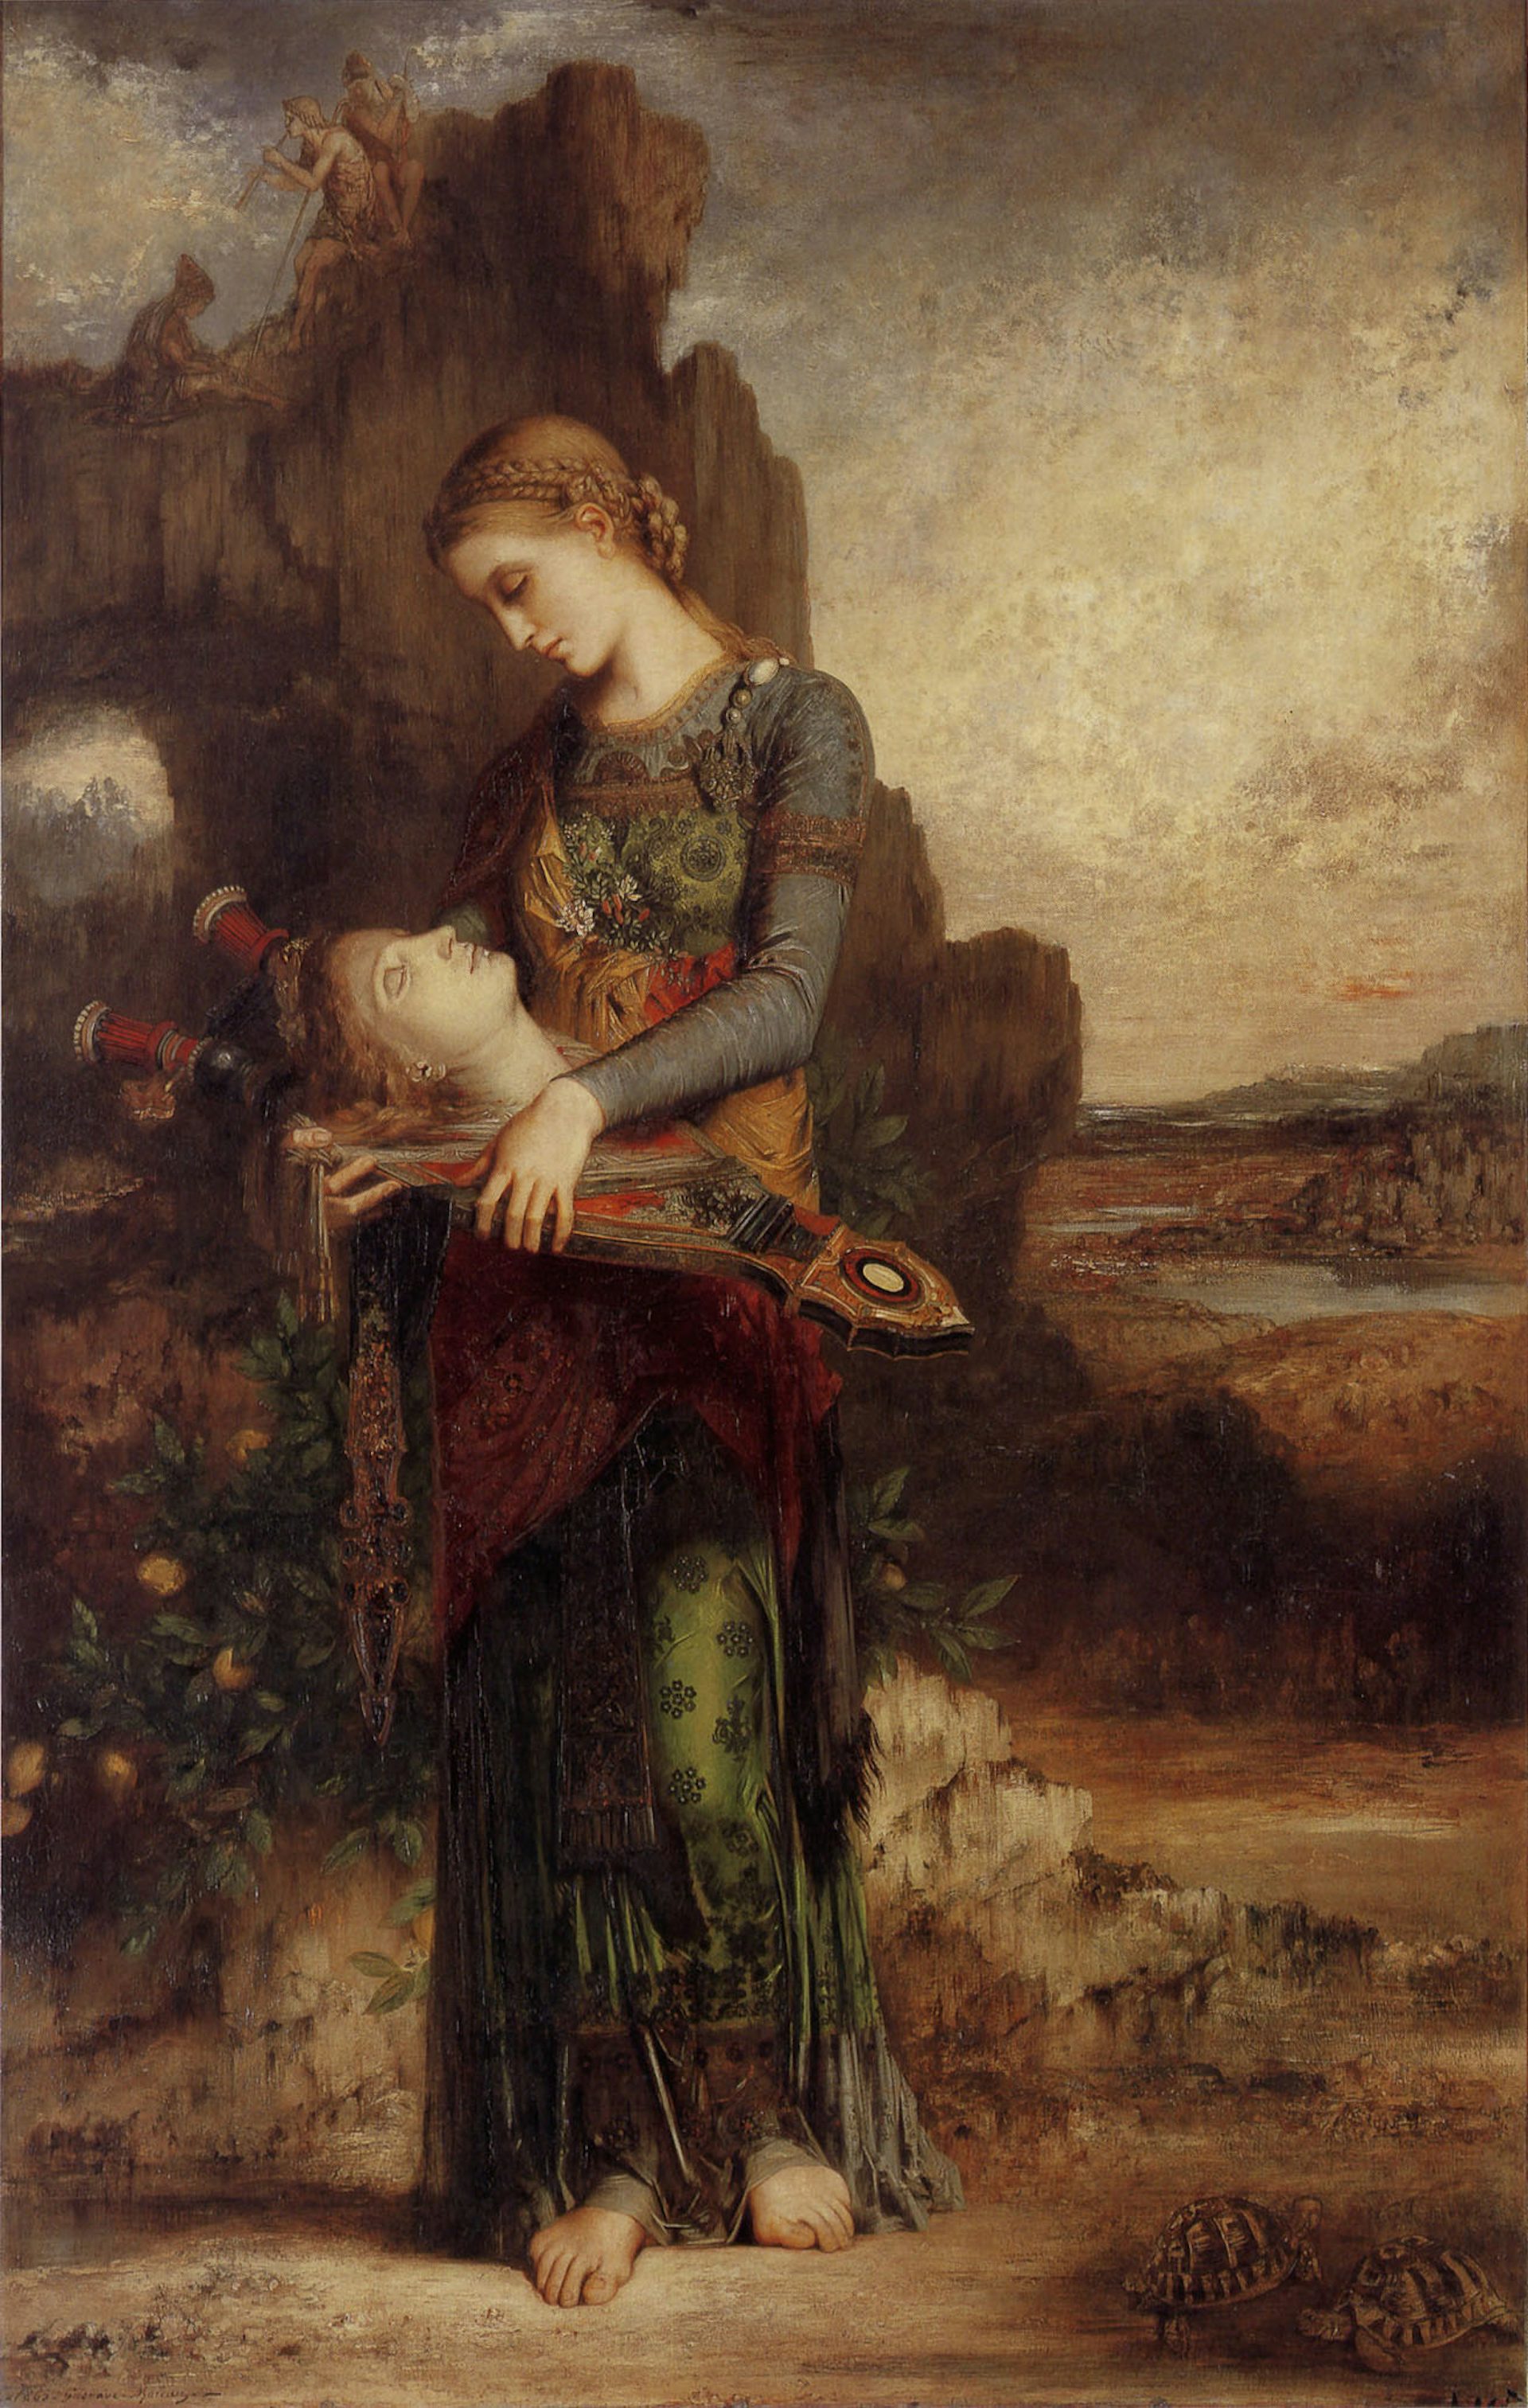 Thracian Girl Carrying the Head of Orpheus on his Lyre by Gustave Moreau (1865)